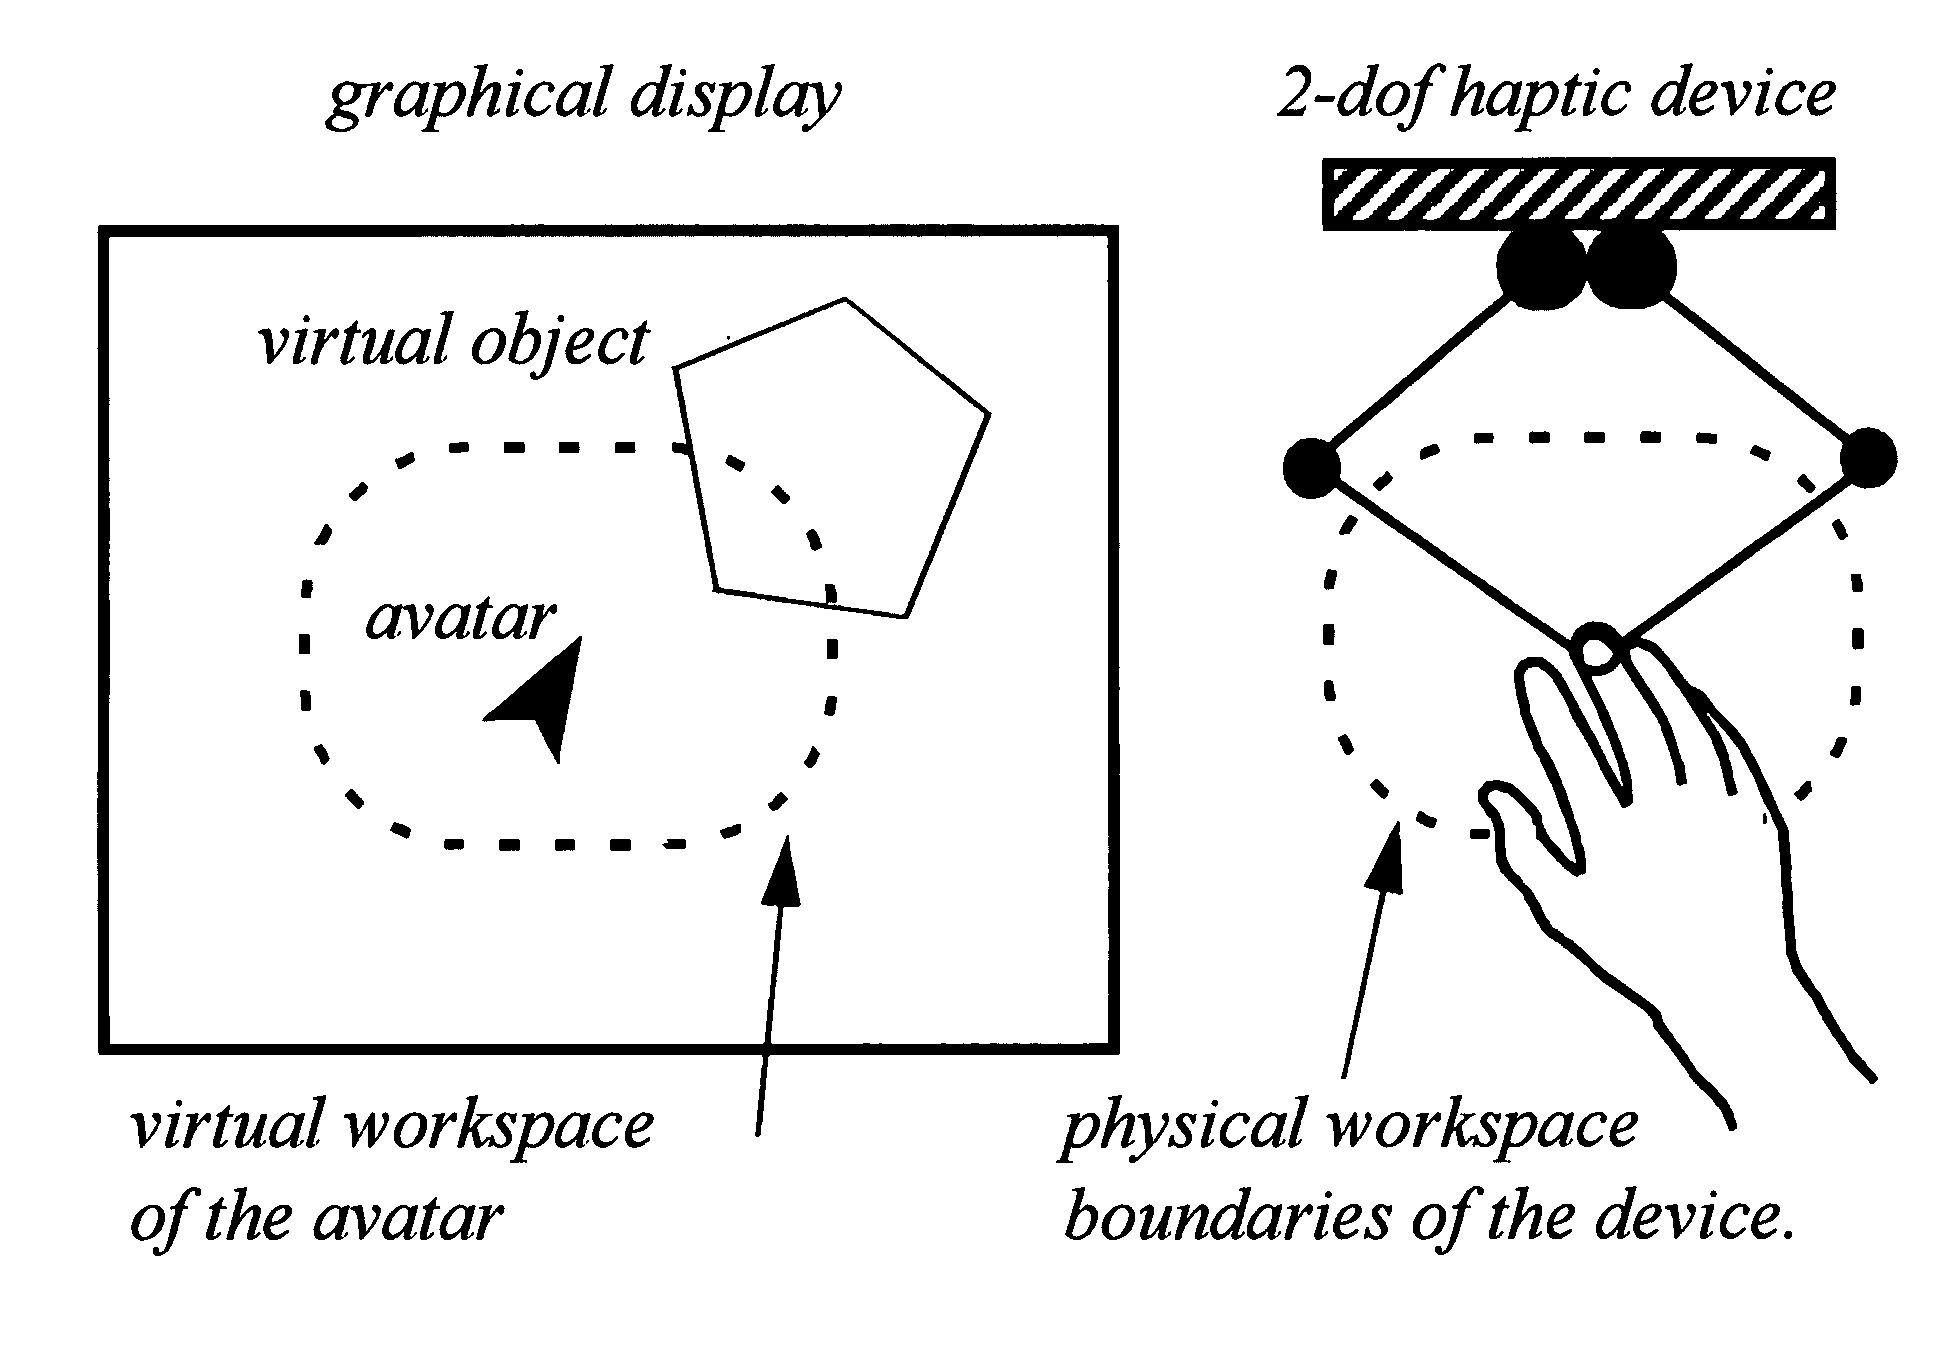 Workspace expansion controller for human interface systems